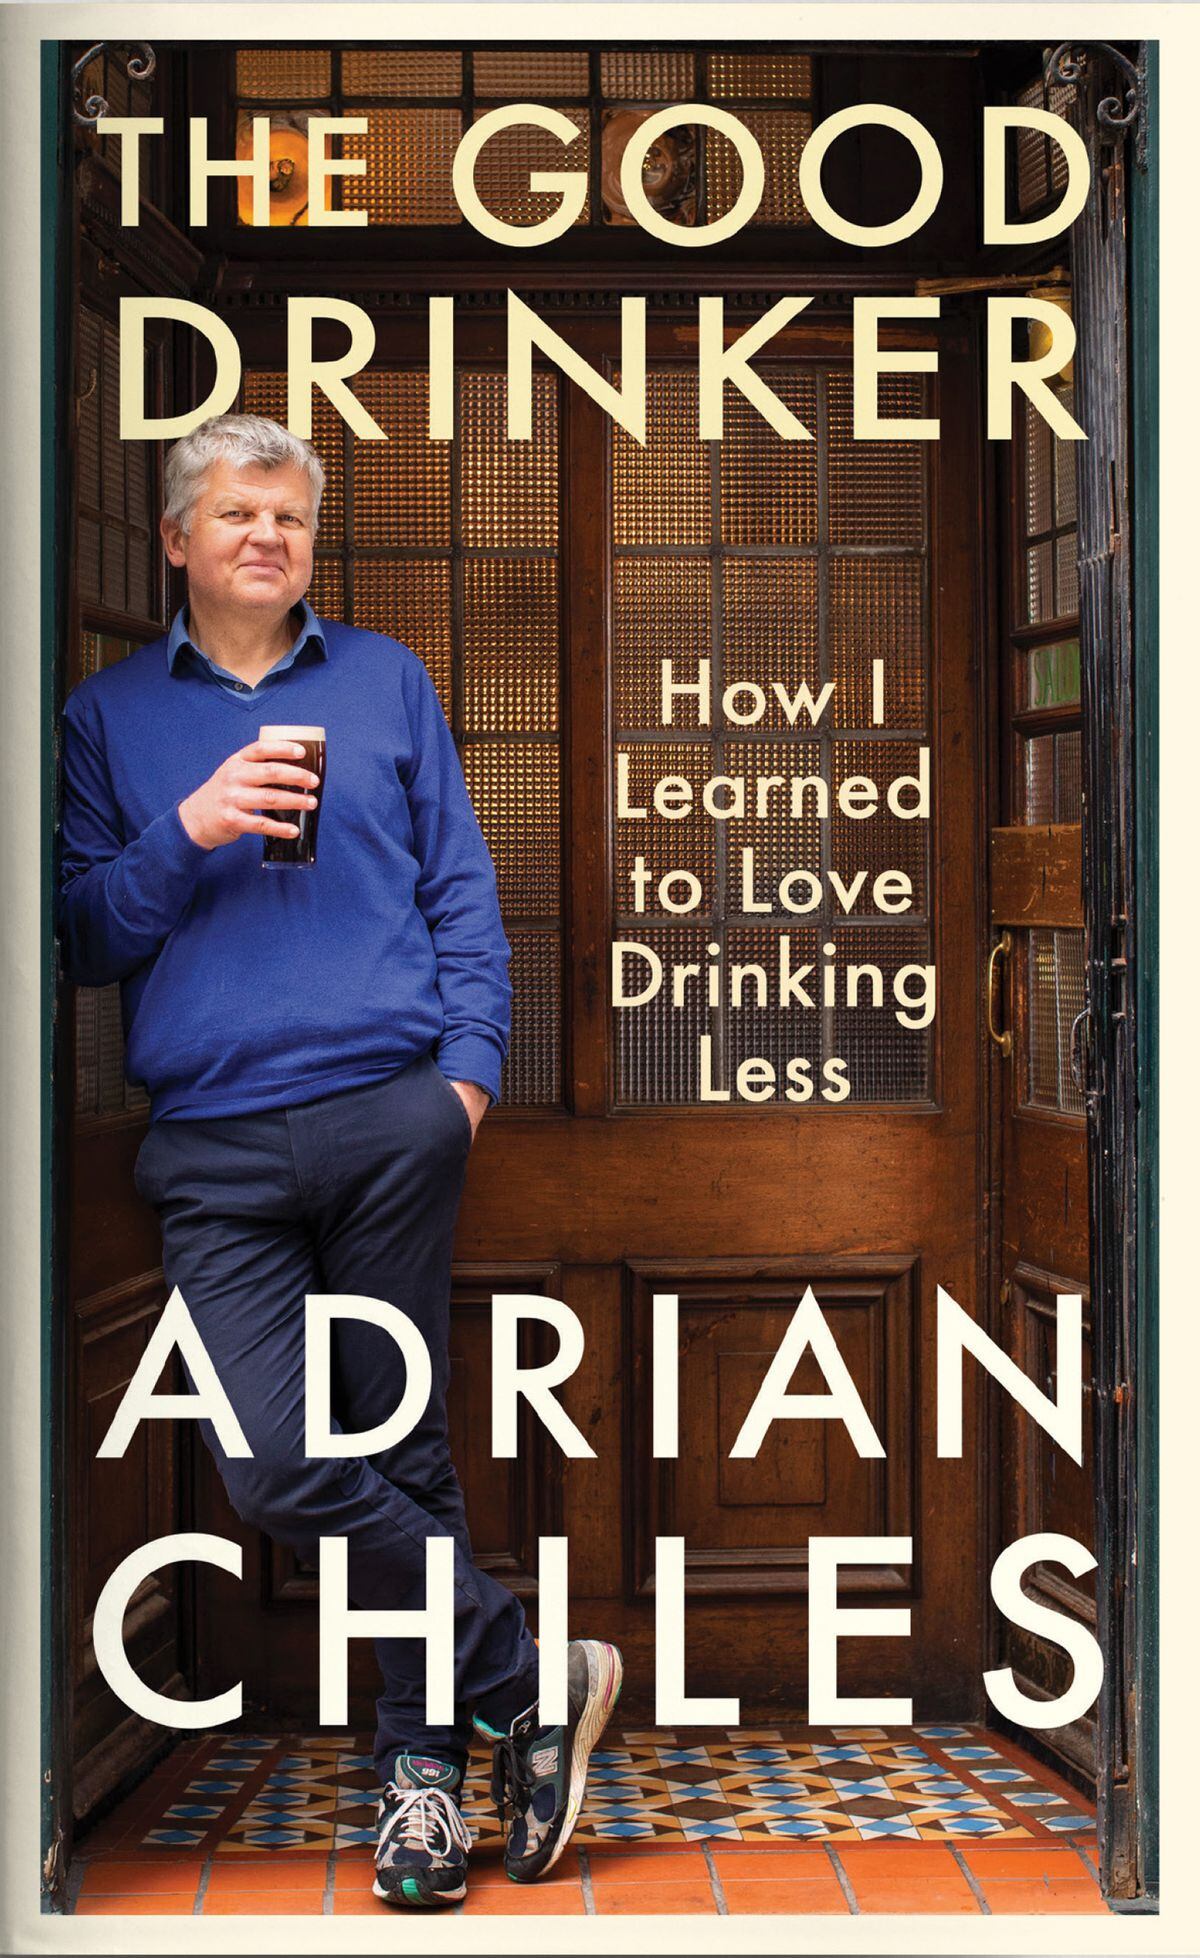 The Good Drinker by Adrian Chiles